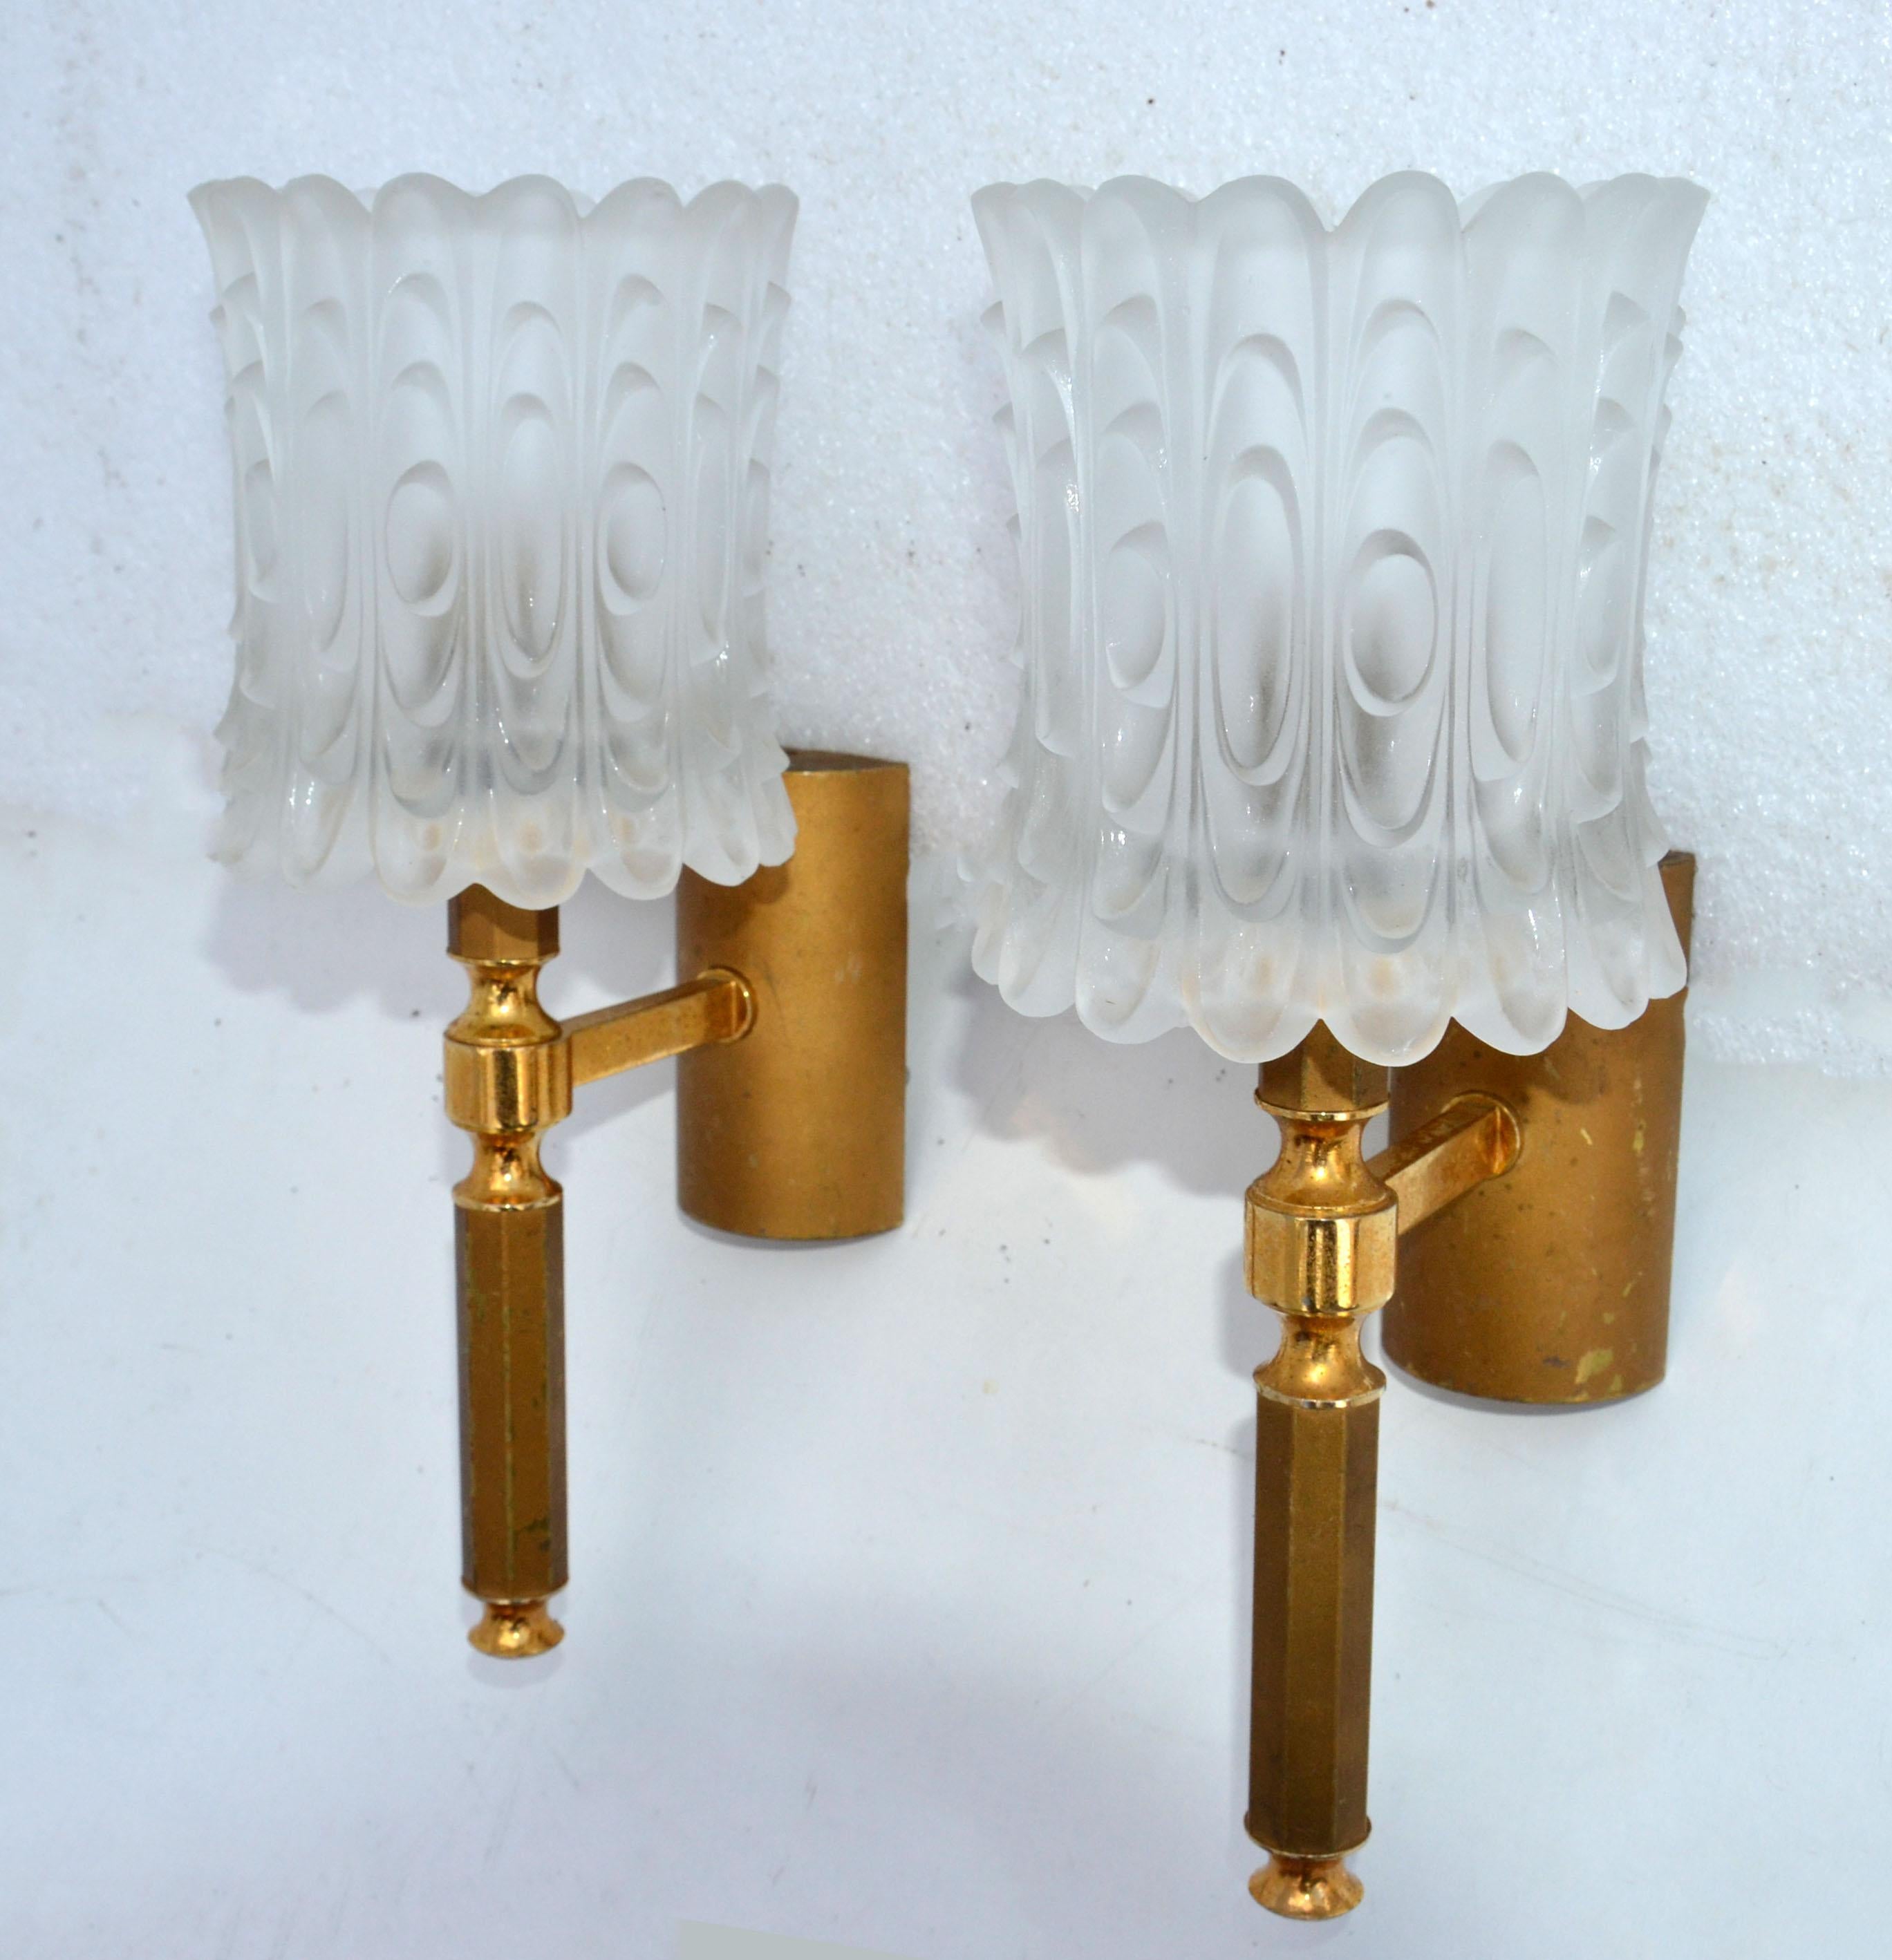 Art Deco French pair of polished brass and thick frosted glass shades sconces, wall lights made in France in the 1950.
Maximum wattage: 60 watts.
Original thick frozen glass shades.
Back plate measures: 4 x 2.5 x 1.25 inches height.
Also